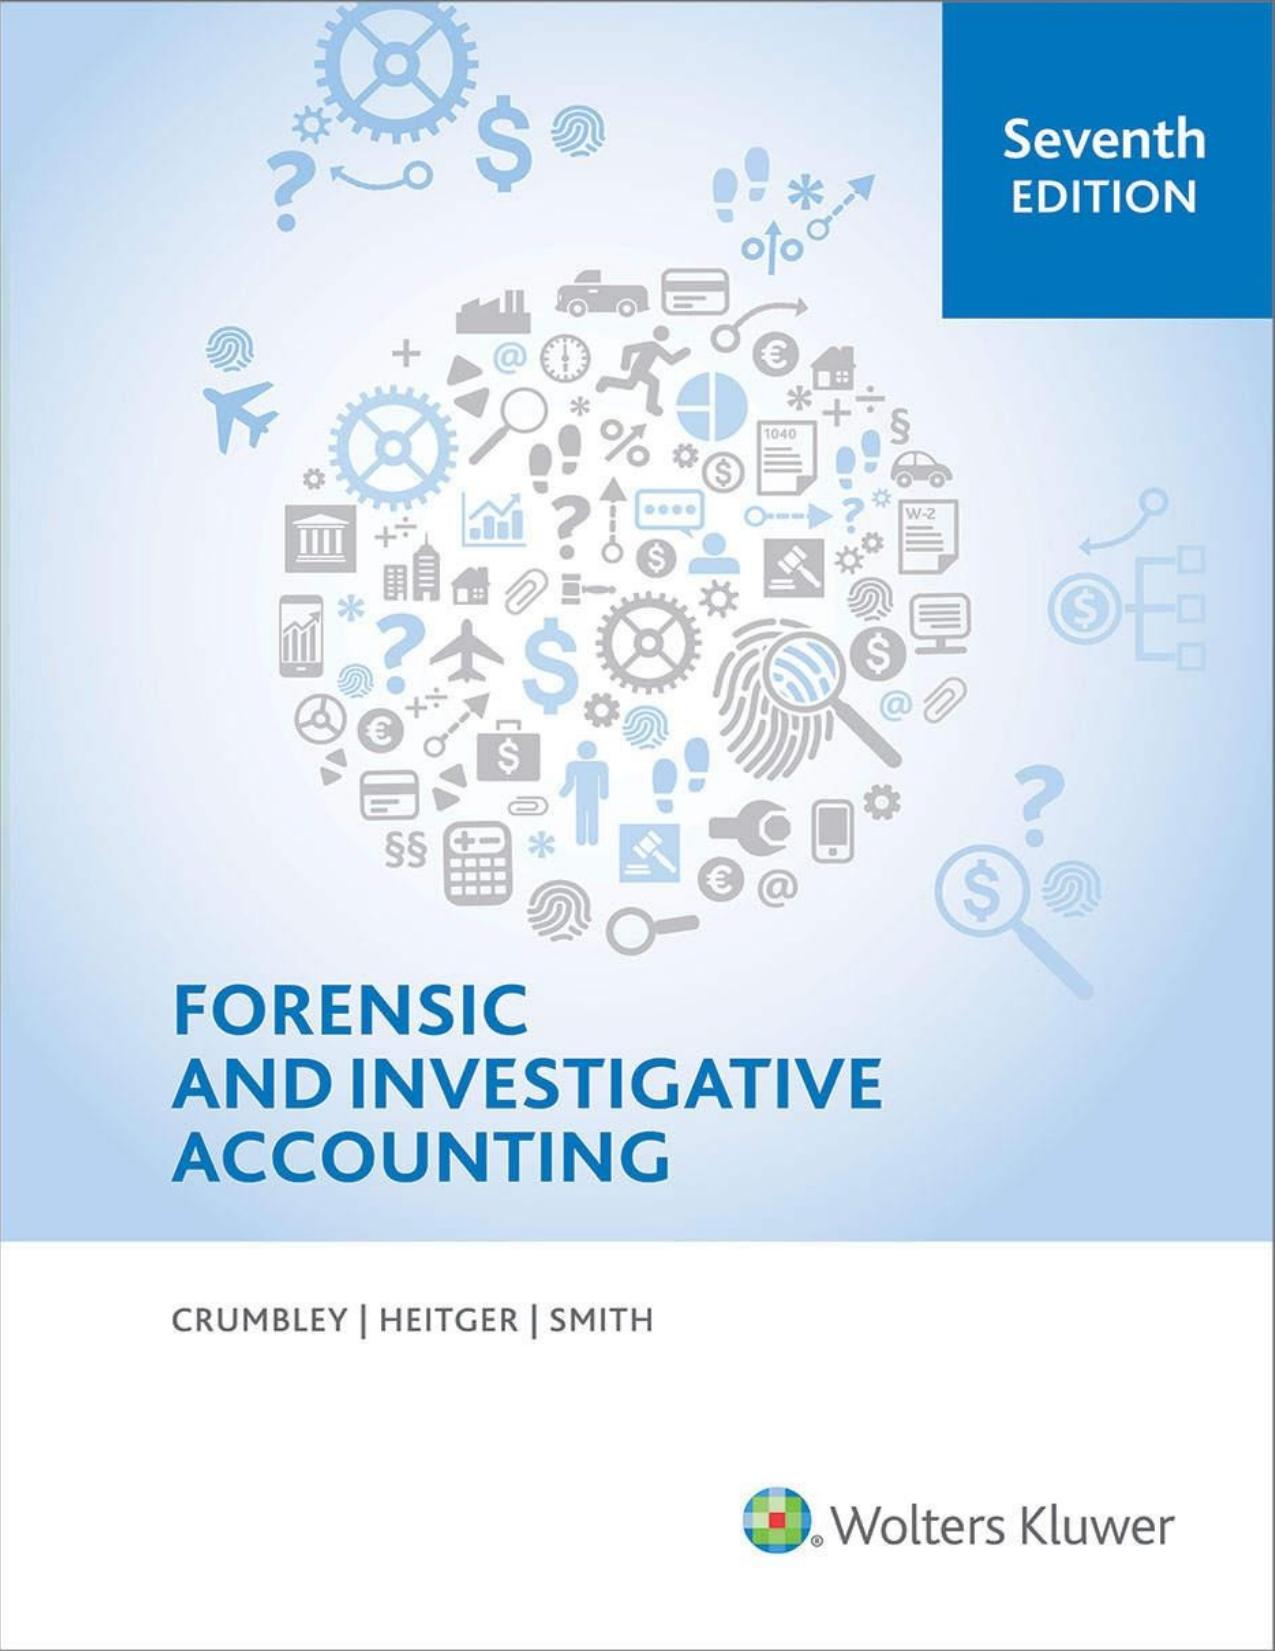 Forensic and Investigative Accounting (7th Edition)